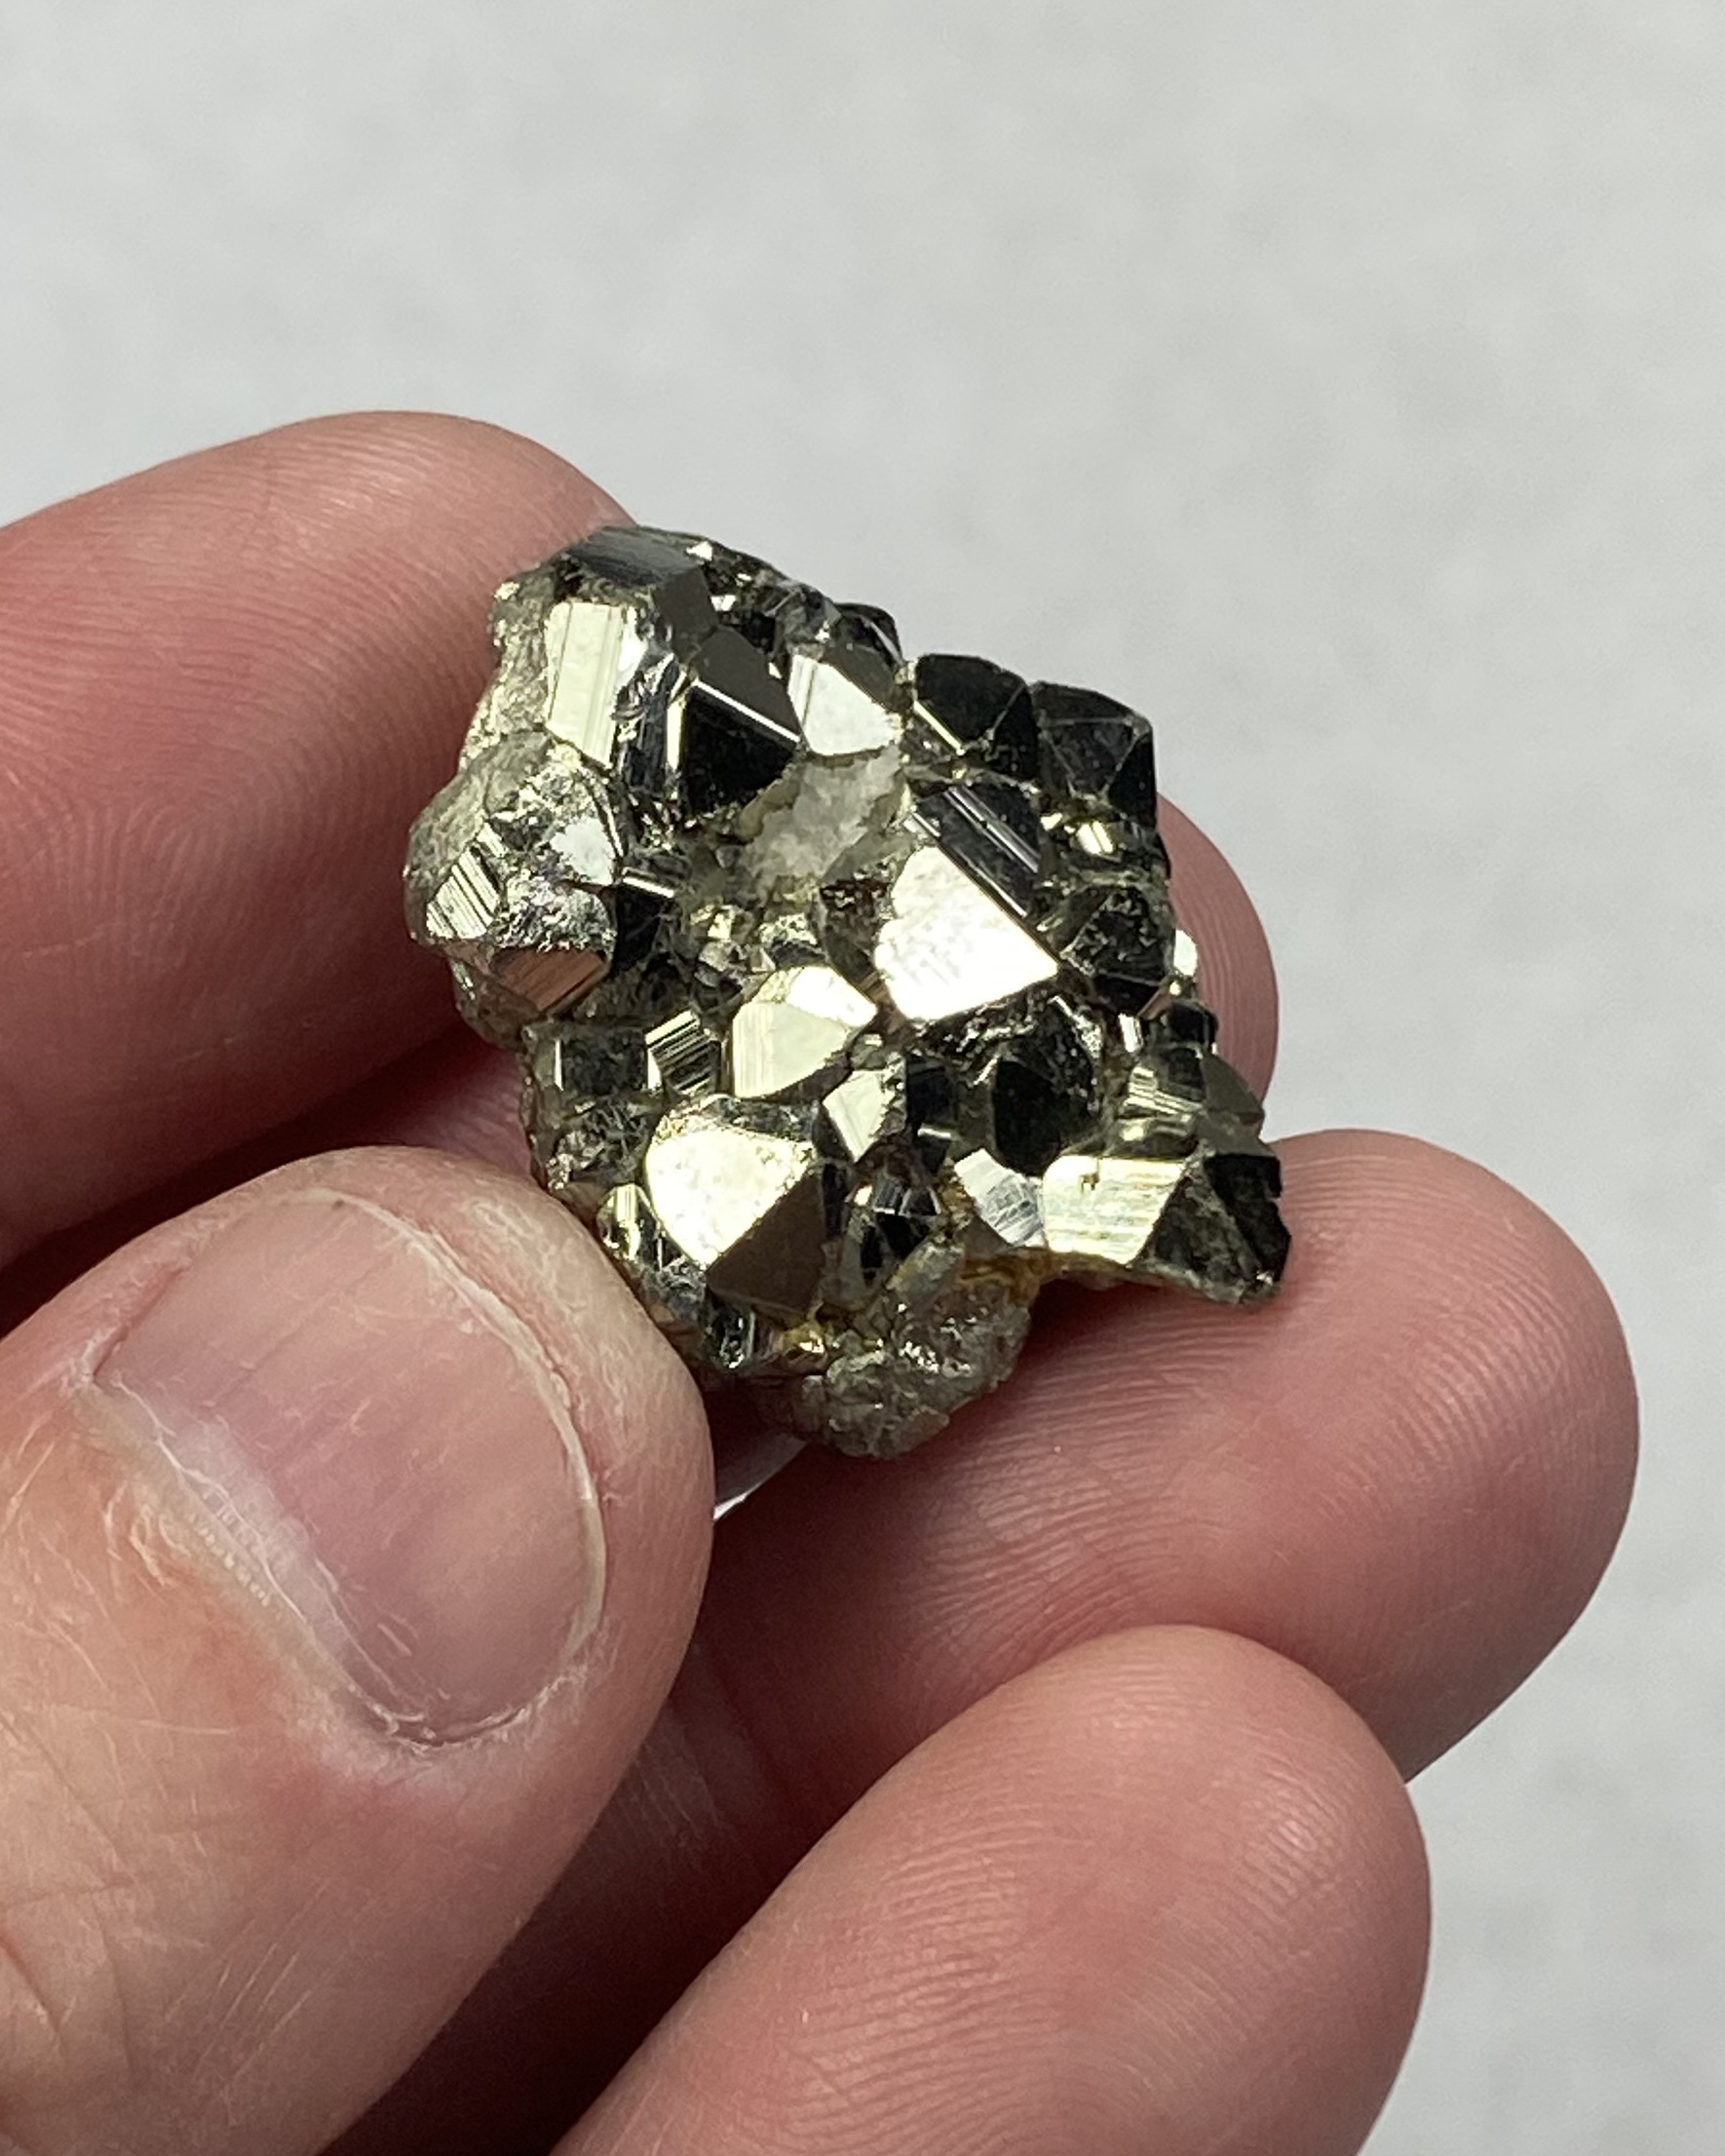 Pyrite - pyritohedral crystal form